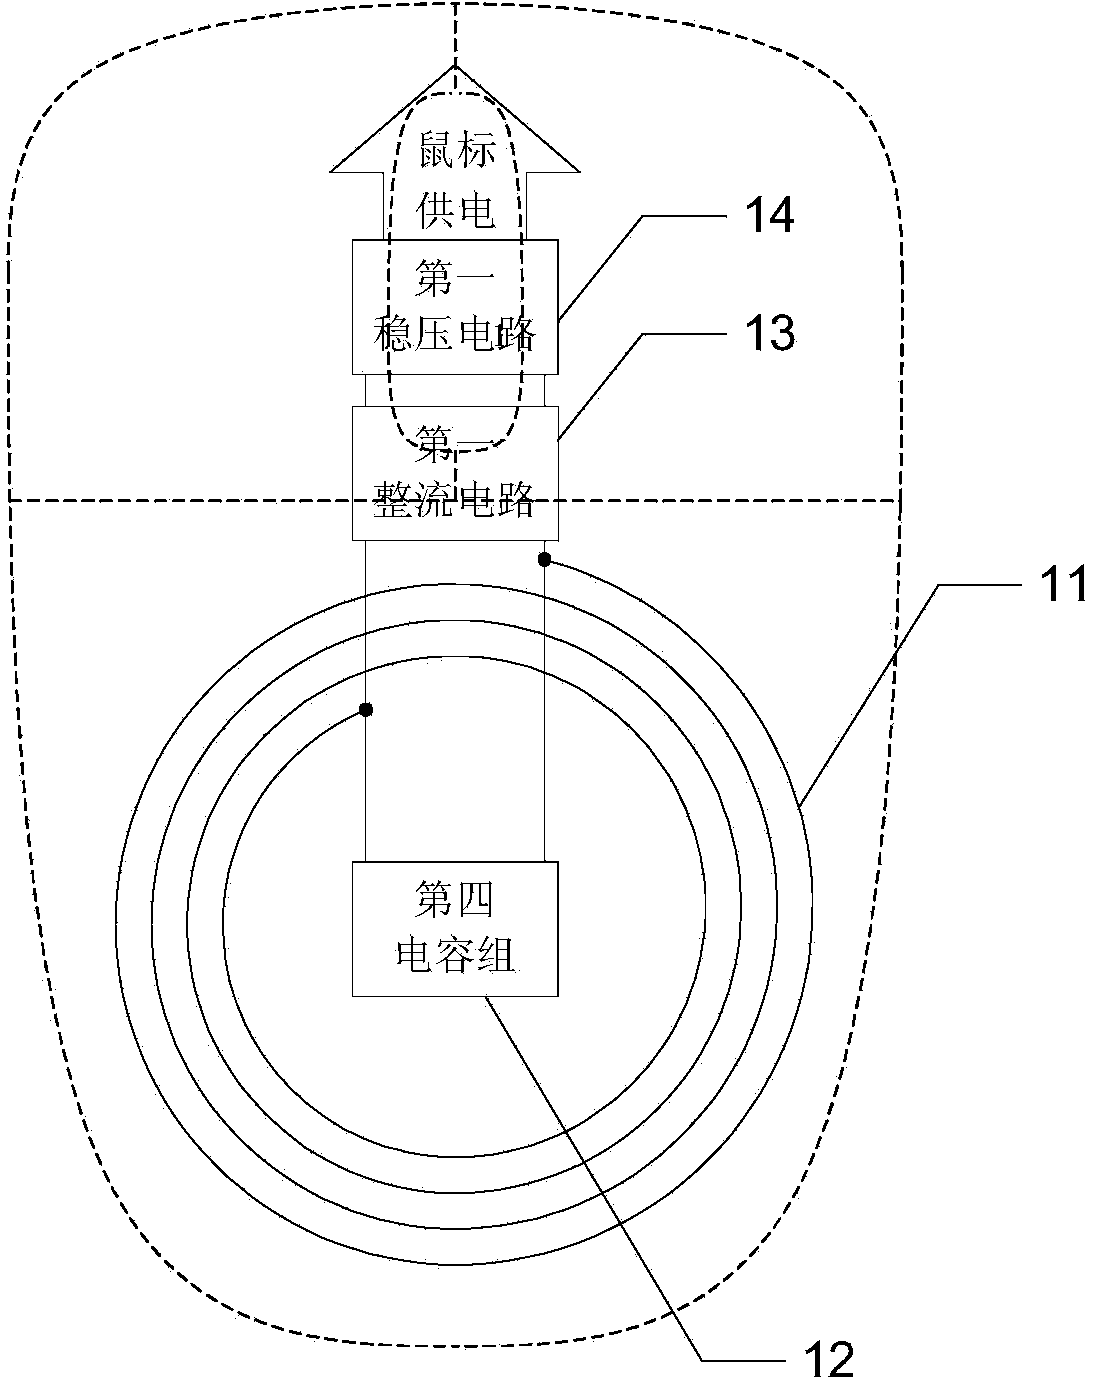 Passive wireless mouse and keyboard based on wireless power transmission